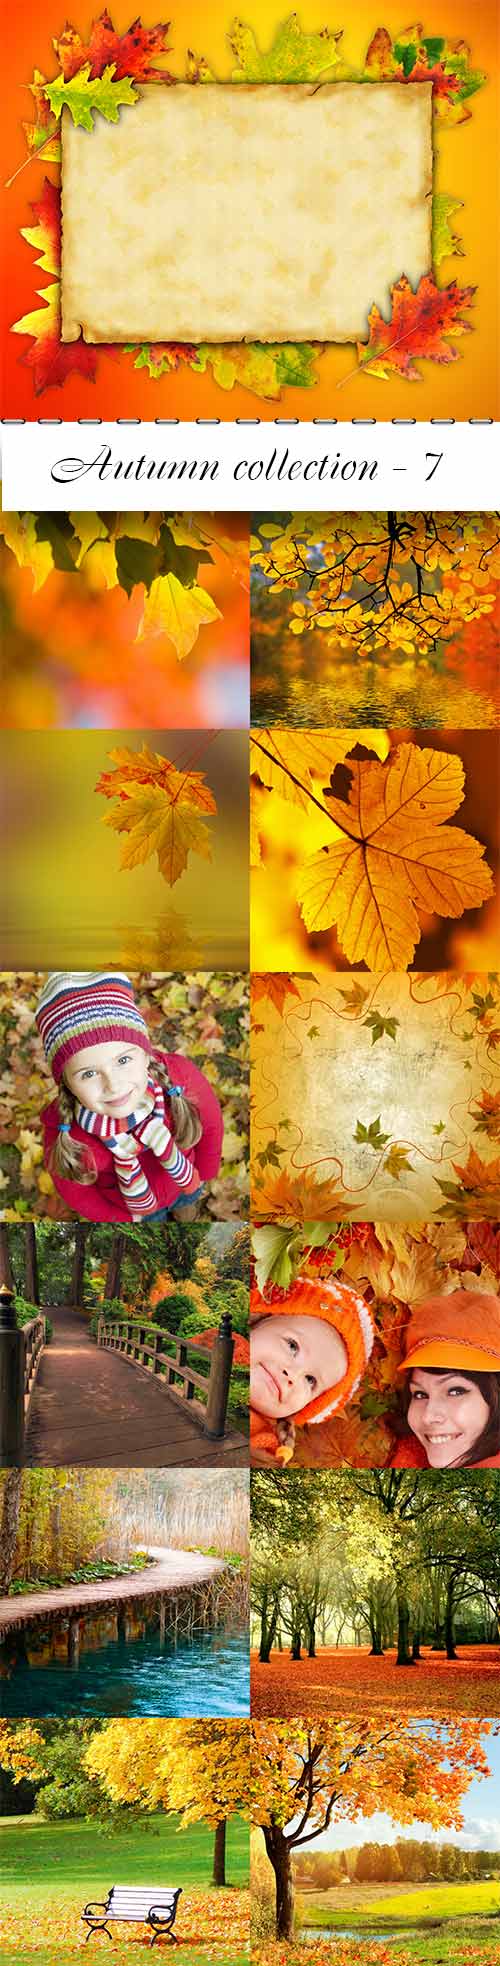 Autumn collection raster graphics - 7